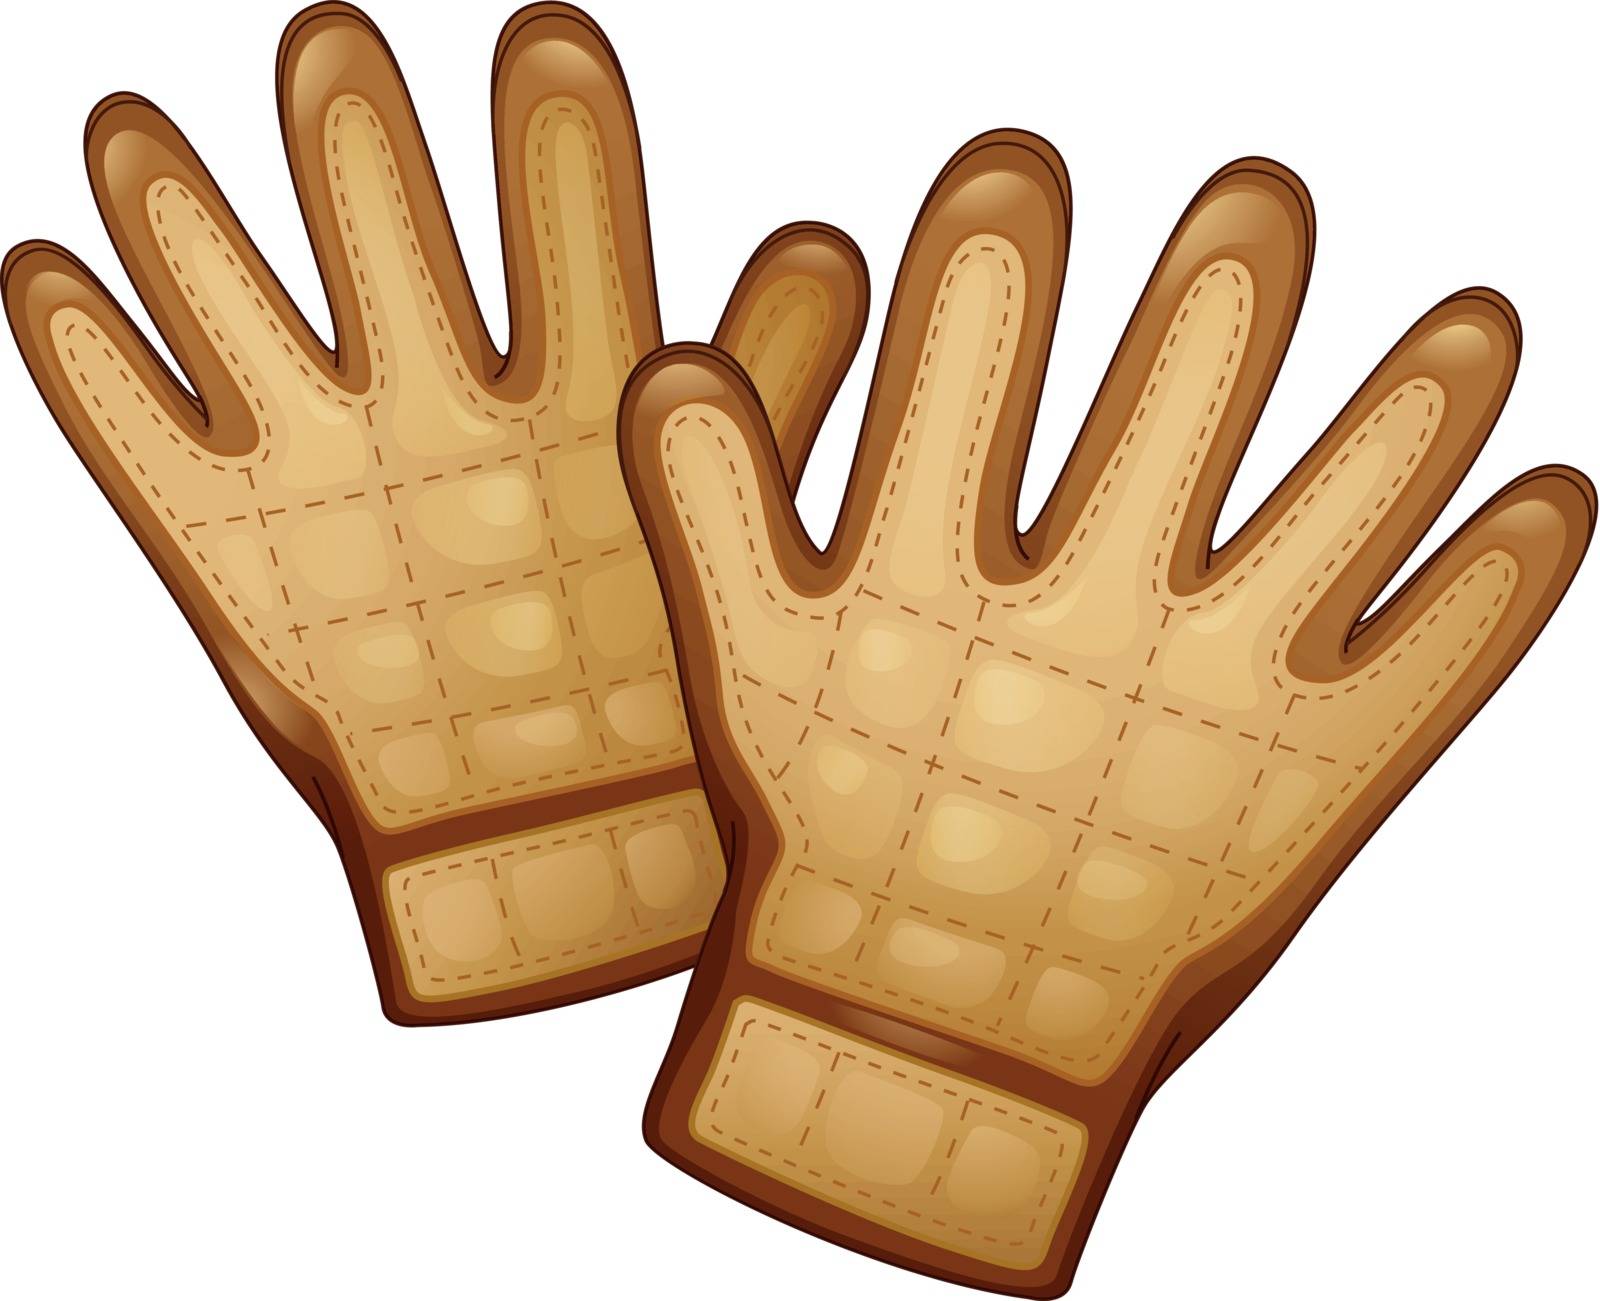 Illustration of a pair of leather gloves on a white background